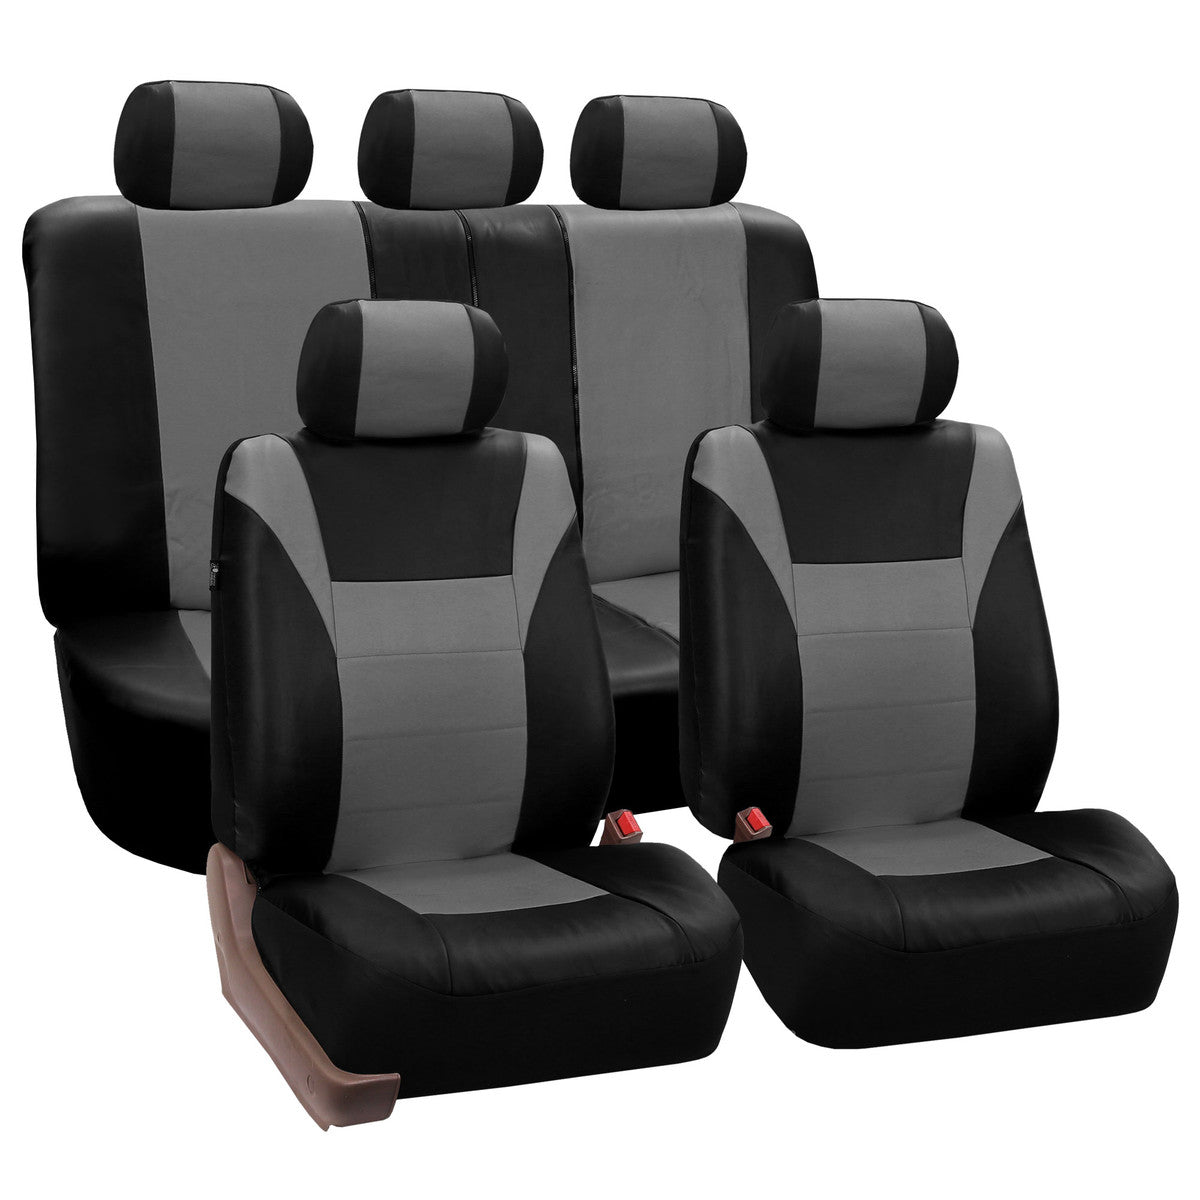 Racing PU Leather Seat Covers - Full Set Gray